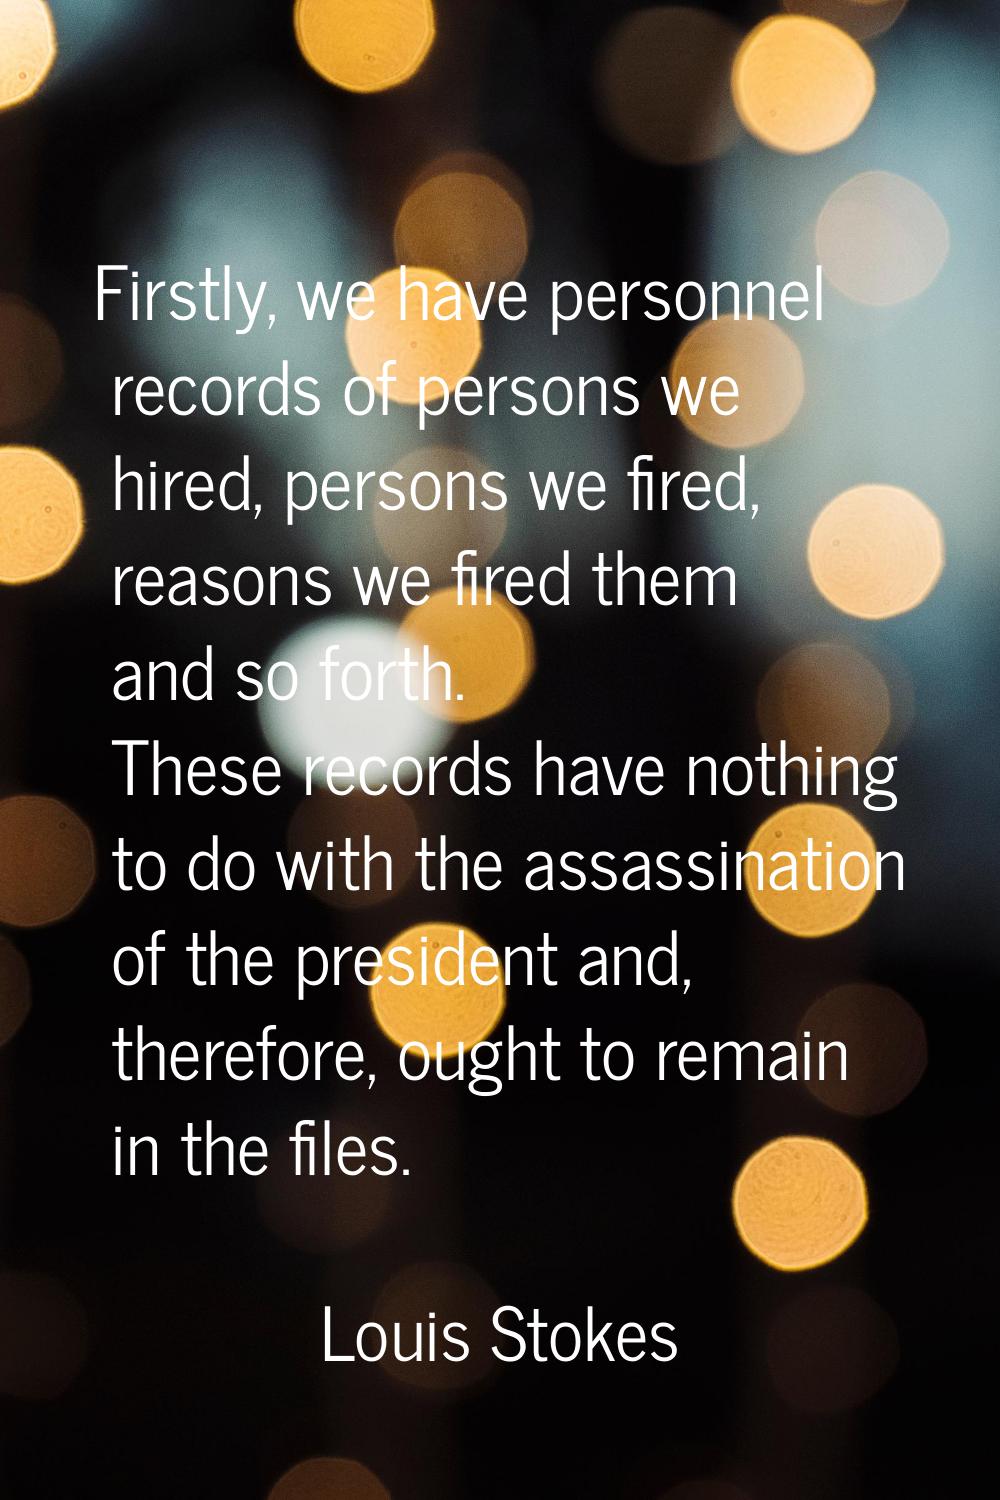 Firstly, we have personnel records of persons we hired, persons we fired, reasons we fired them and